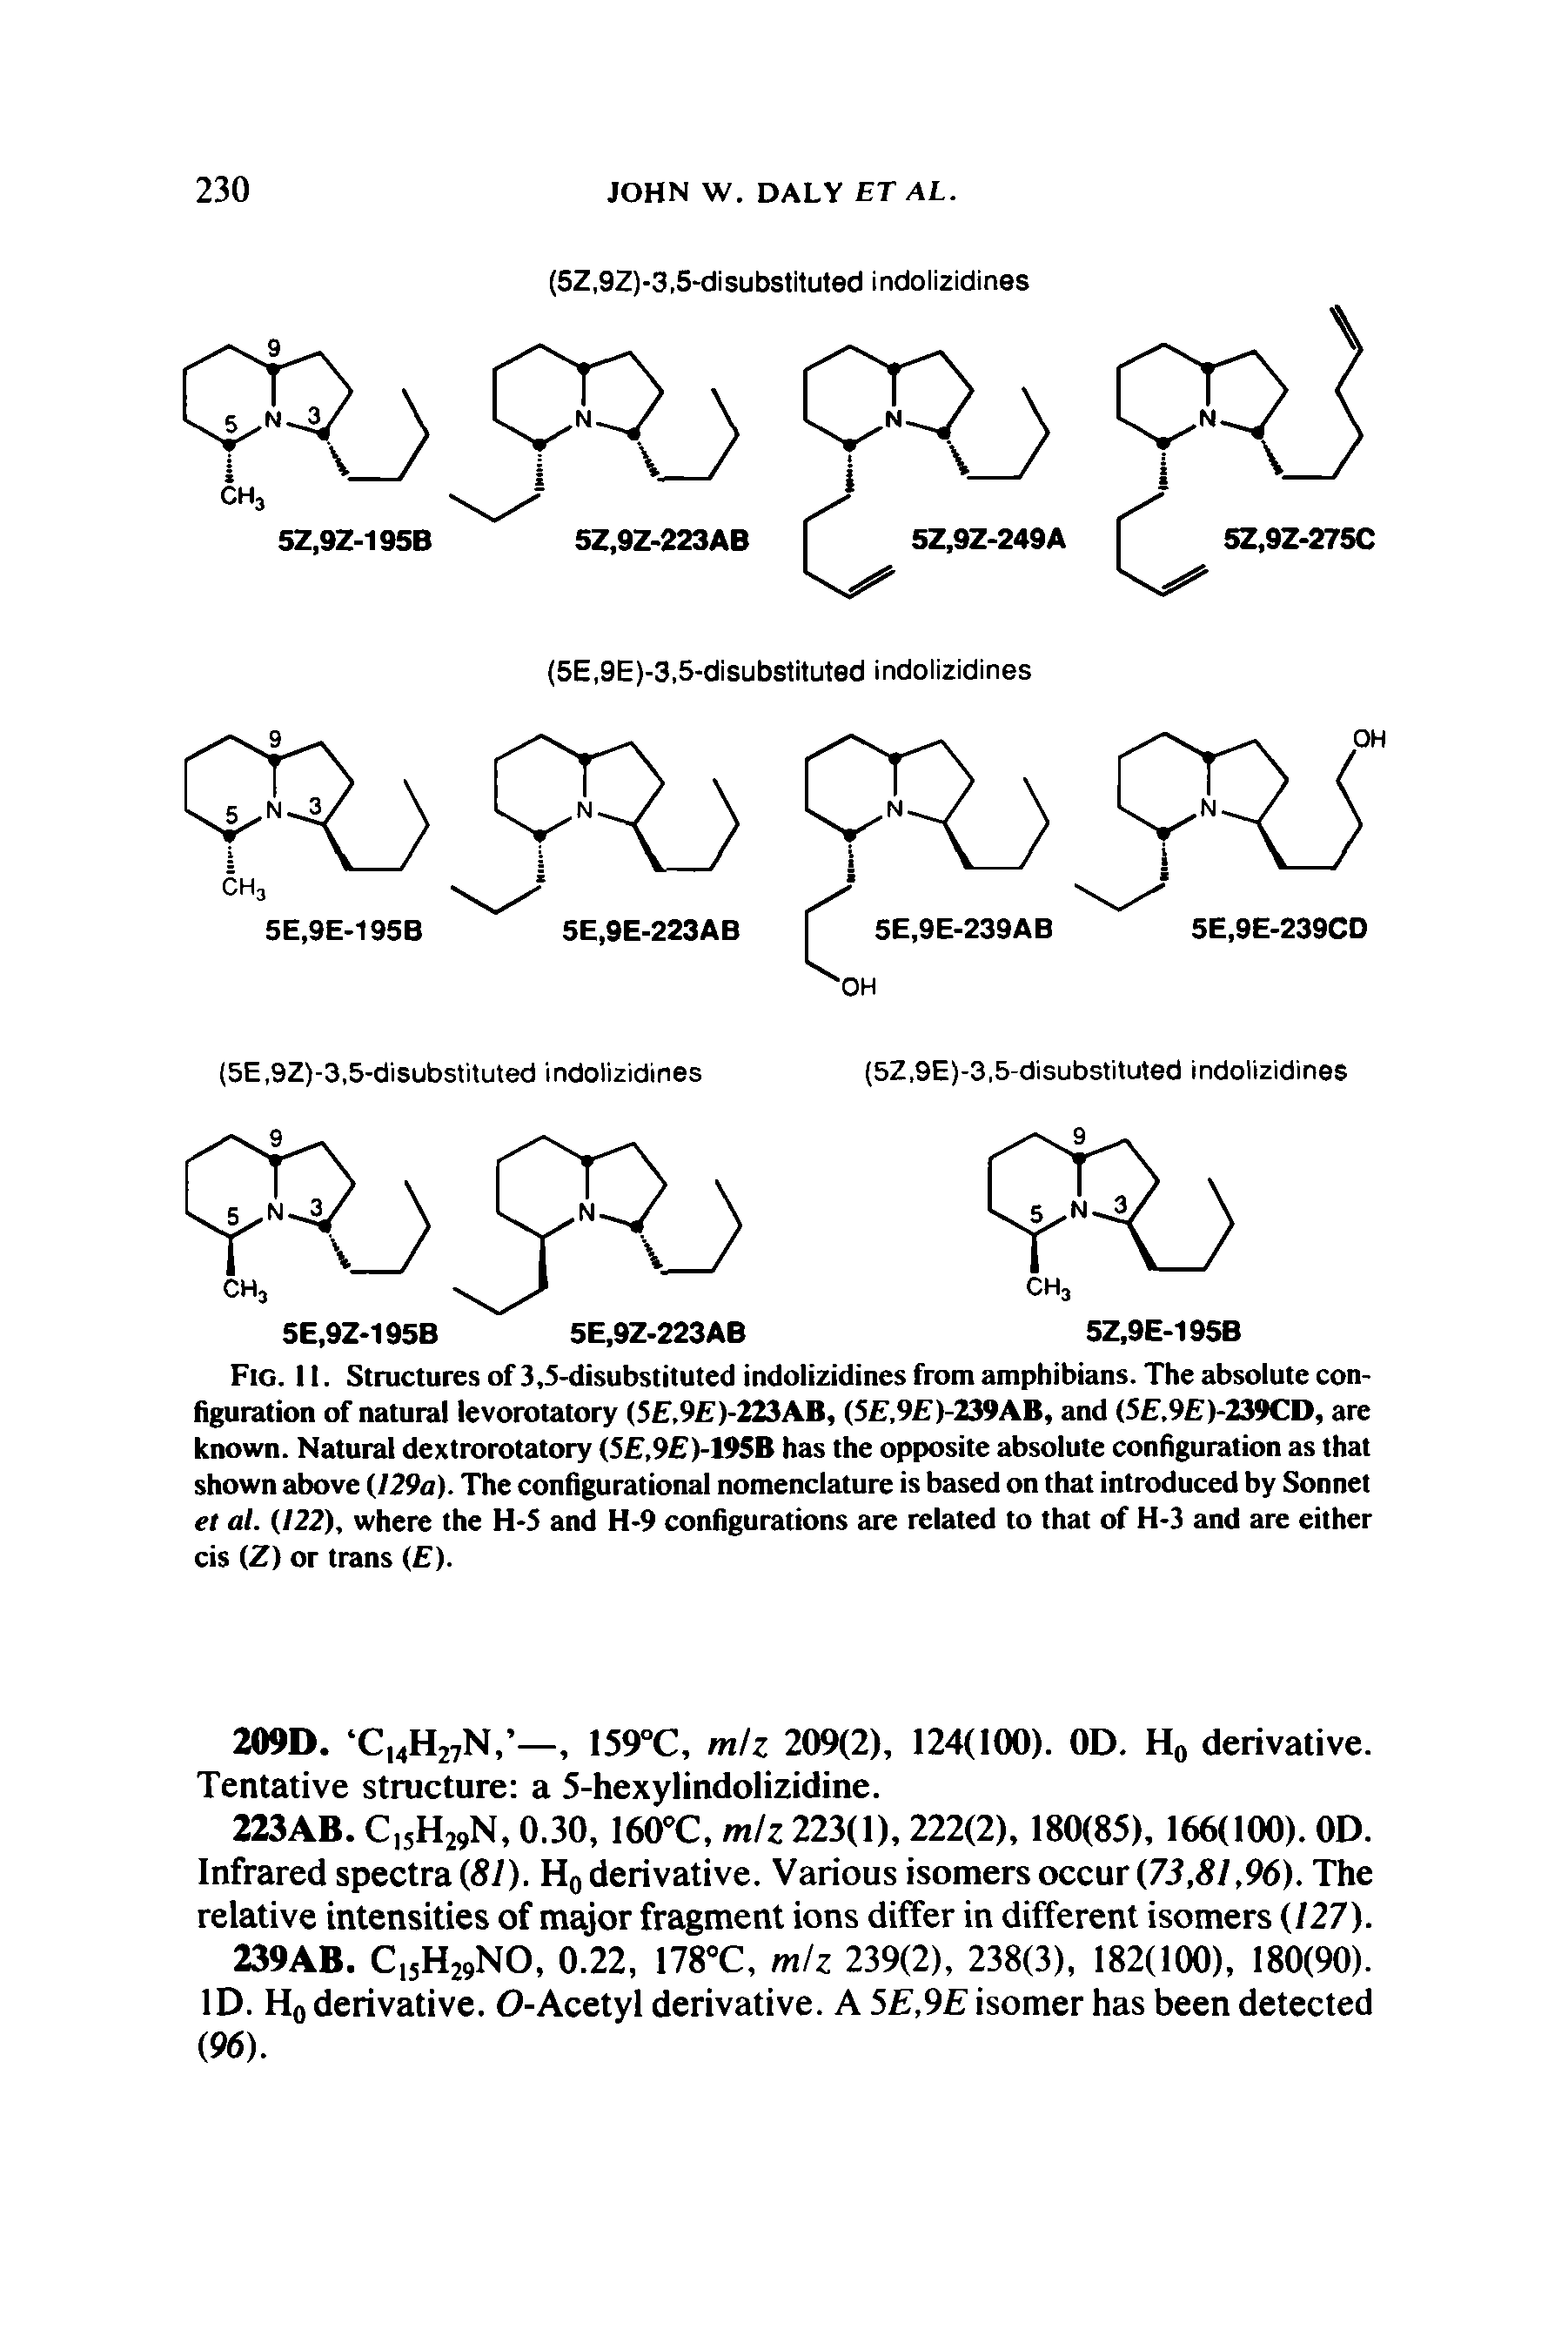 Fig. II. Structures of 3,5-disubstituted indolizidines from amphibians. The absolute configuration of natural levorotatory (S ,9 )-223AB, (5 .9 )-239AB, and (5 .9 )-239CD, are known. Natural dextrorotatory (S ,9 )-195B has the opposite absolute configuration as that shown above U29a). The configurational nomenclature is based on that introduced by Sonnet et at. (122), where the H-S and H-9 configurations are related to that of H-3 and are either cis (Z) or trans ( ).